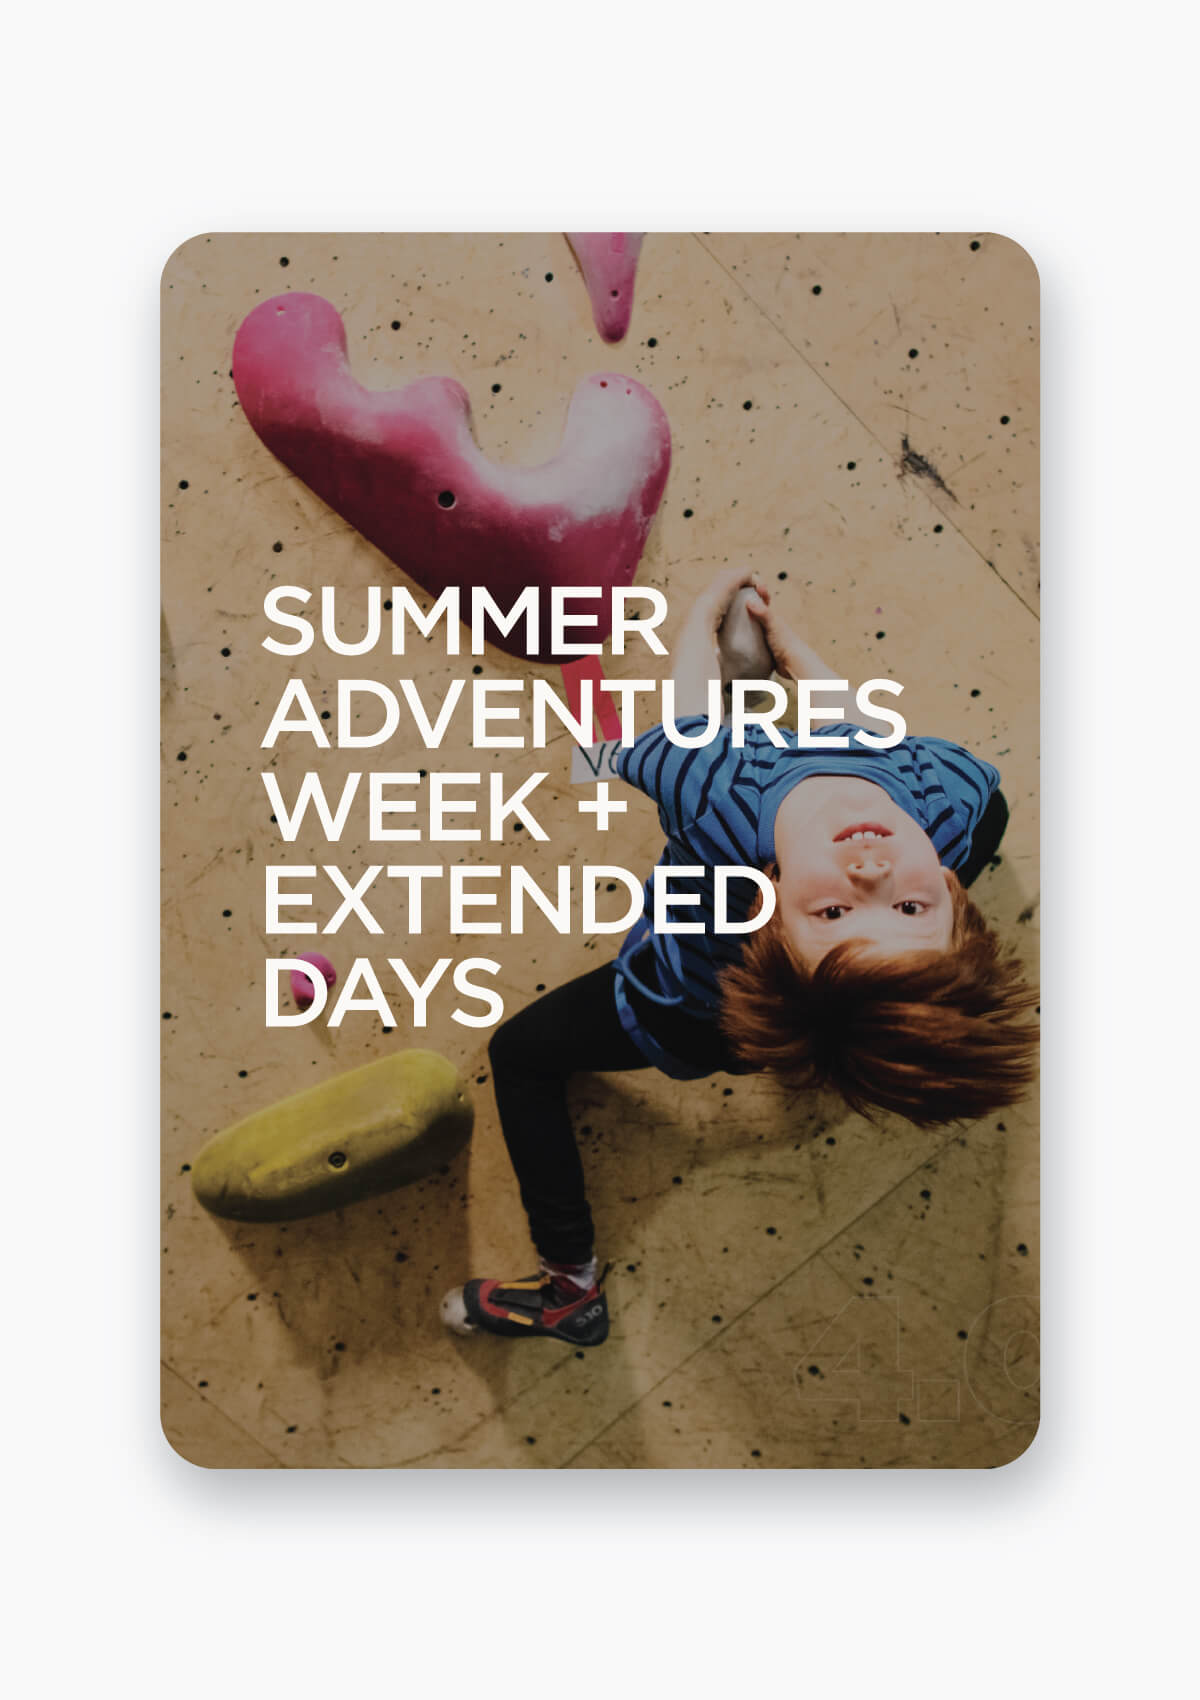 SUMMER ADVENTURES + EXTENDED DAYS